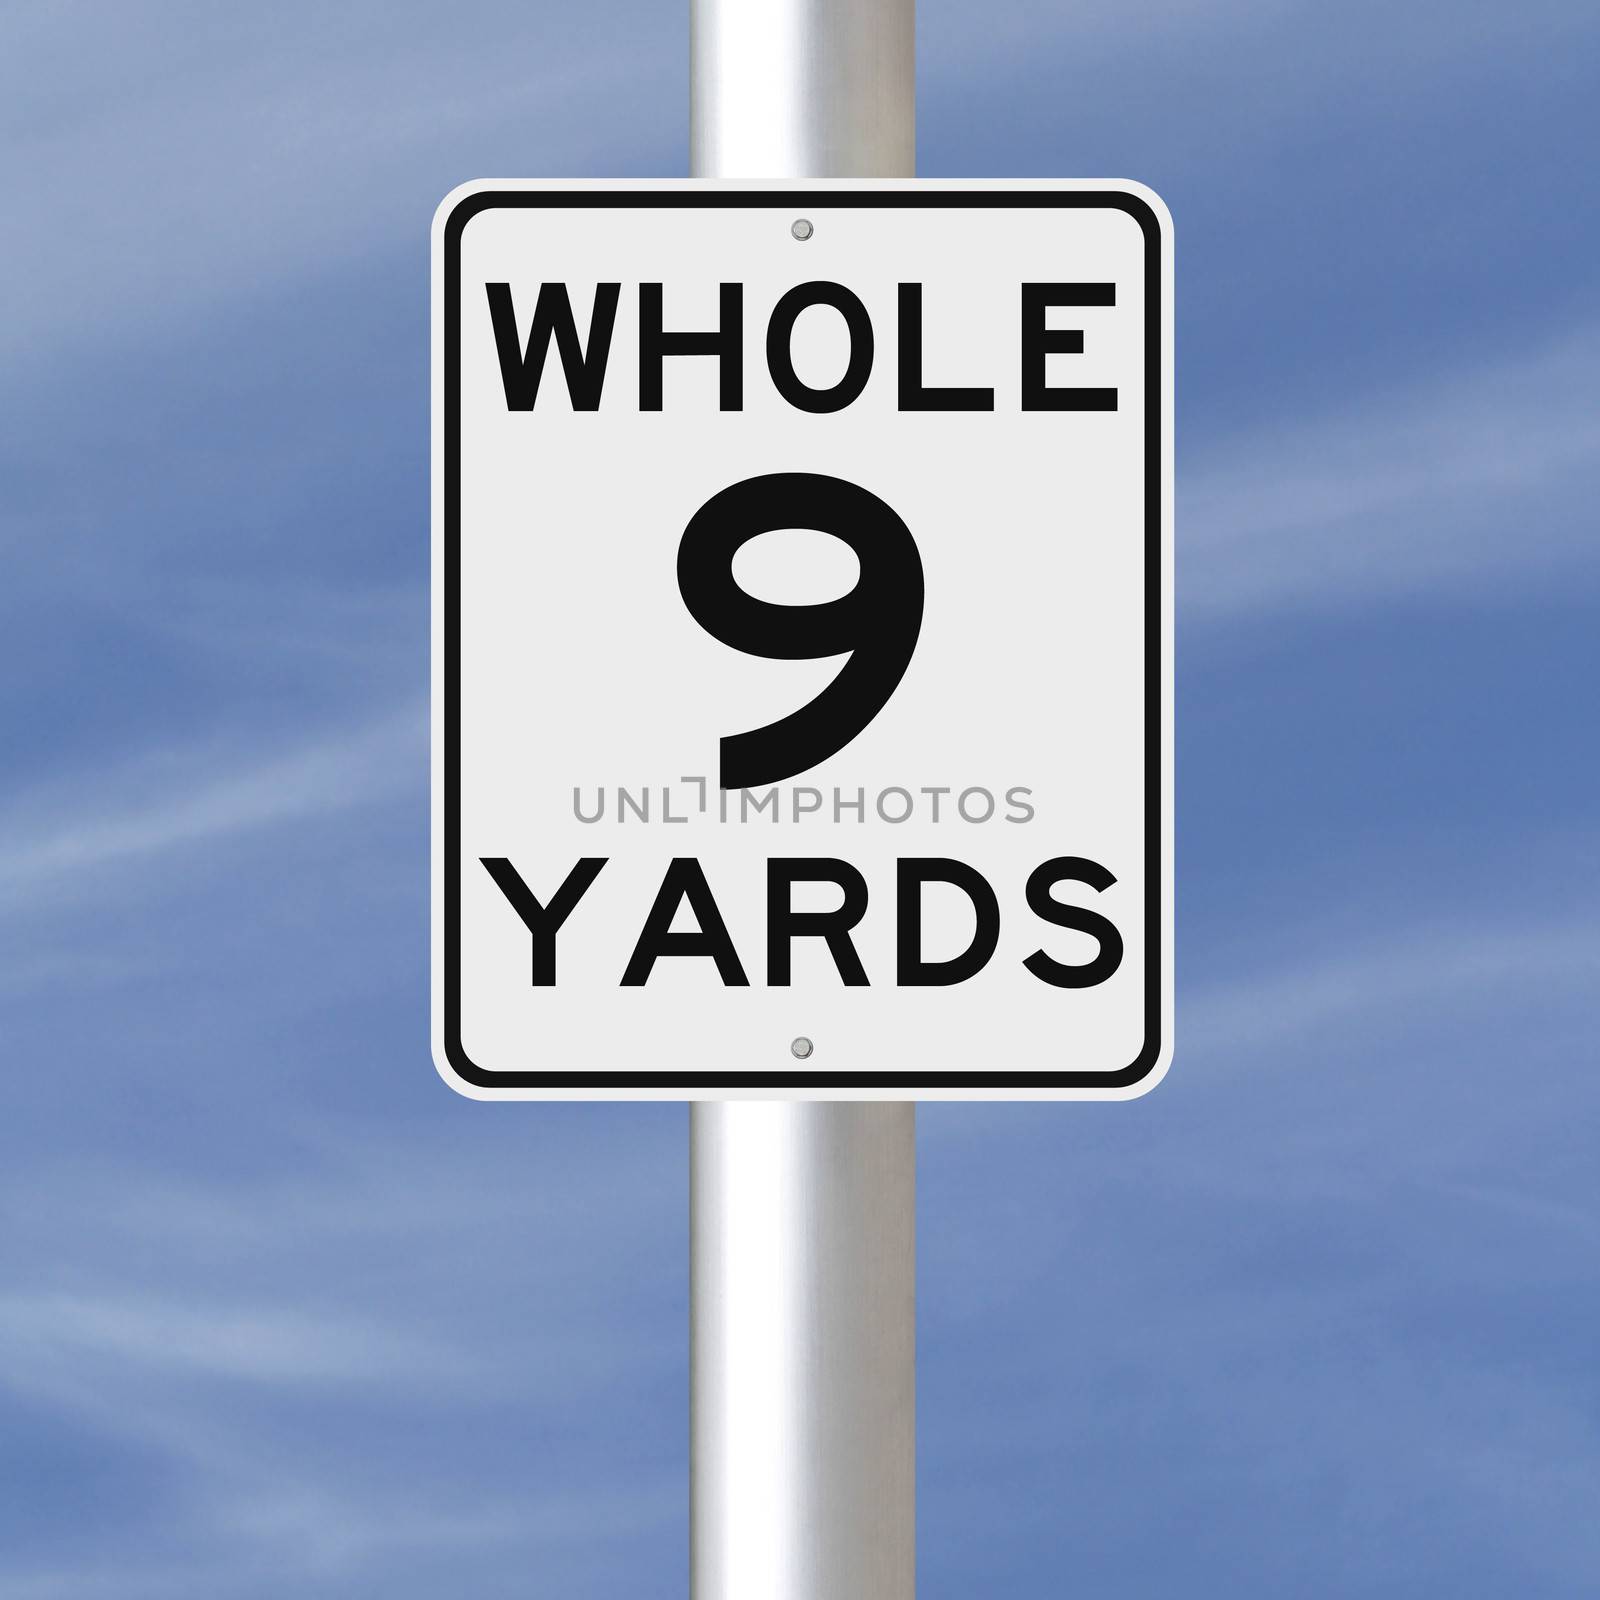 Whole Nine Yards by rnl